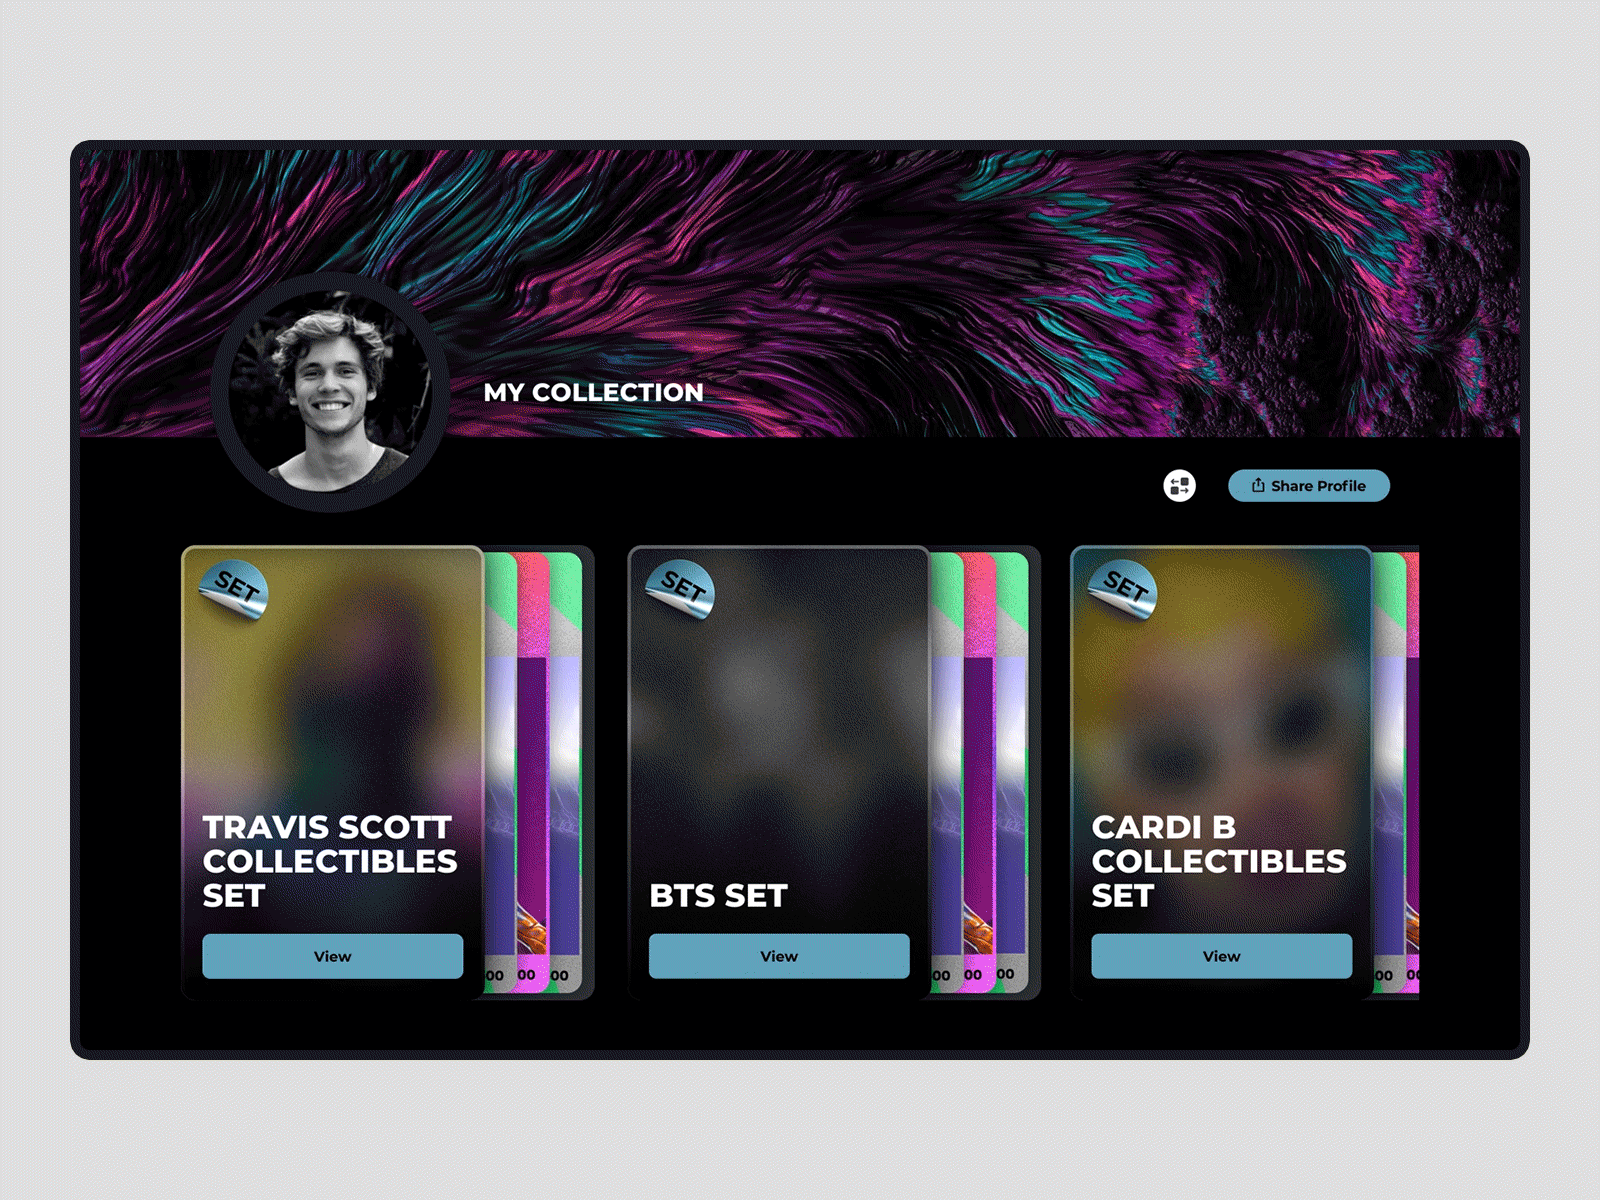 Collectible Card Animation animation cards collectibles collection design interface set site ui uiux